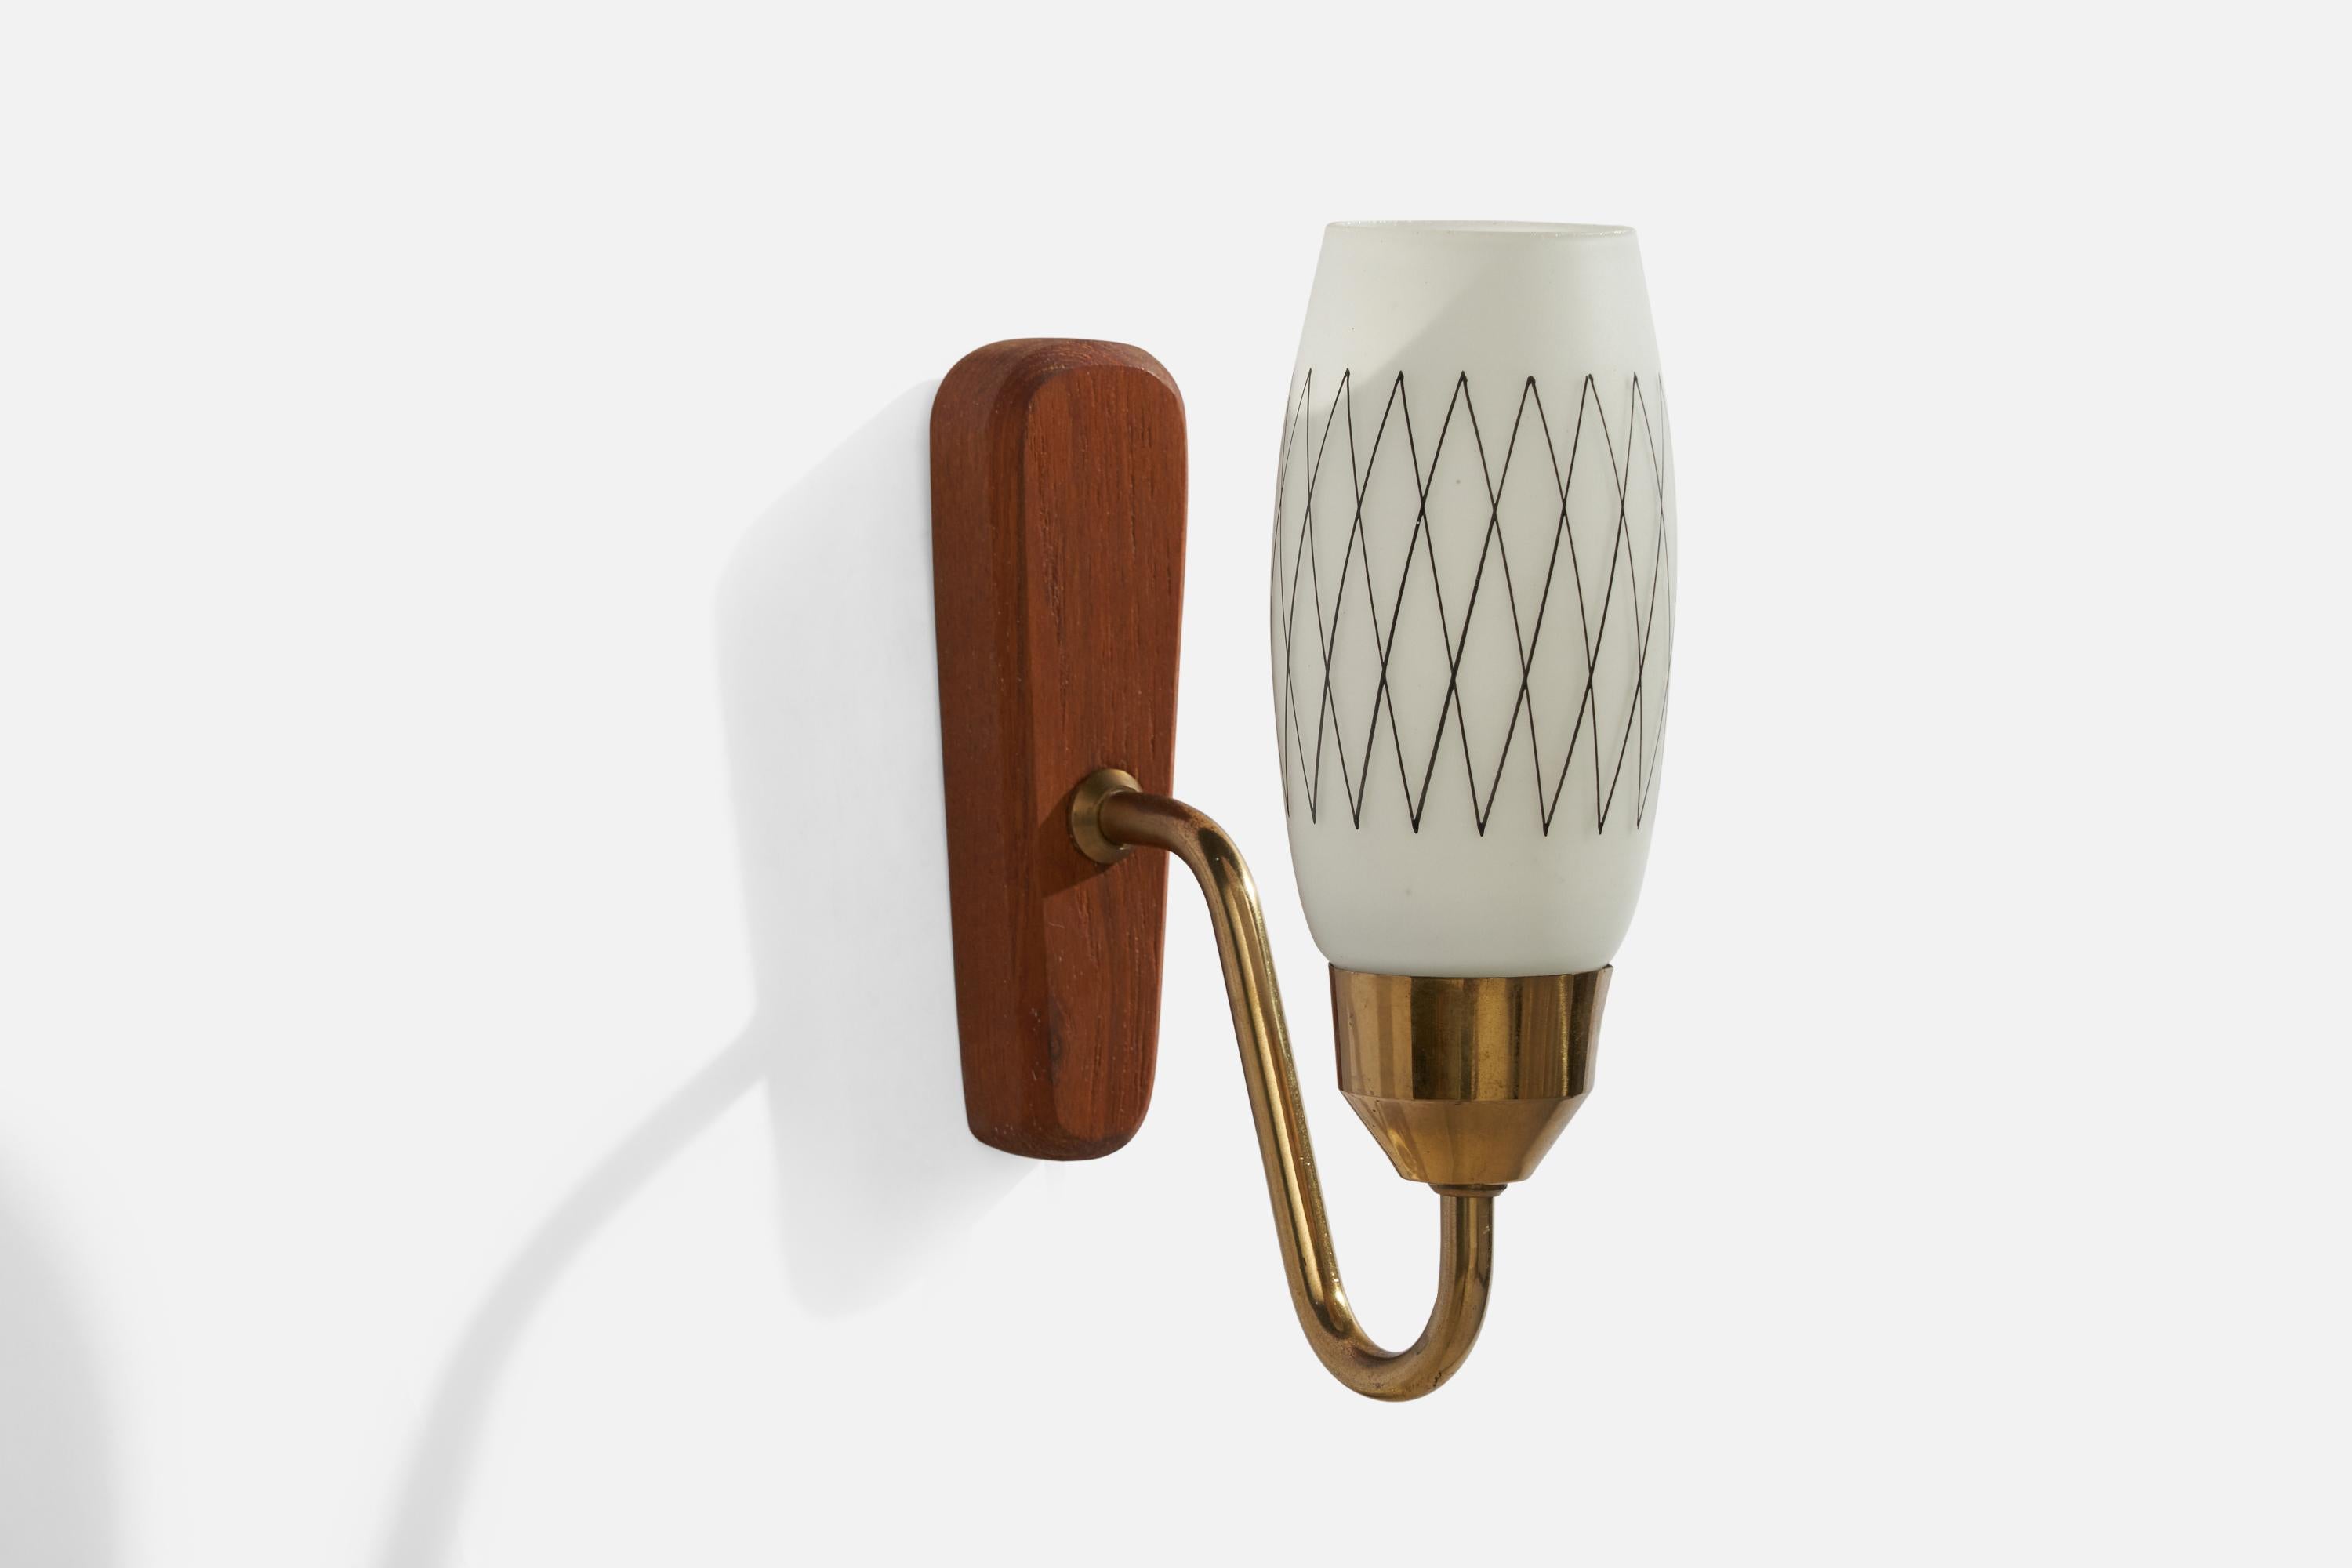 A brass, teak and glass wall light designed and produced in Sweden, 1950s.

Overall Dimensions (inches): 8.5” H x 2.8” W x 6.5” D
Back Plate Dimensions (inches): 5.85” H x 1.8” W x 0.93” D
Bulb Specifications: E-14 Bulb
Number of Sockets: 1
All